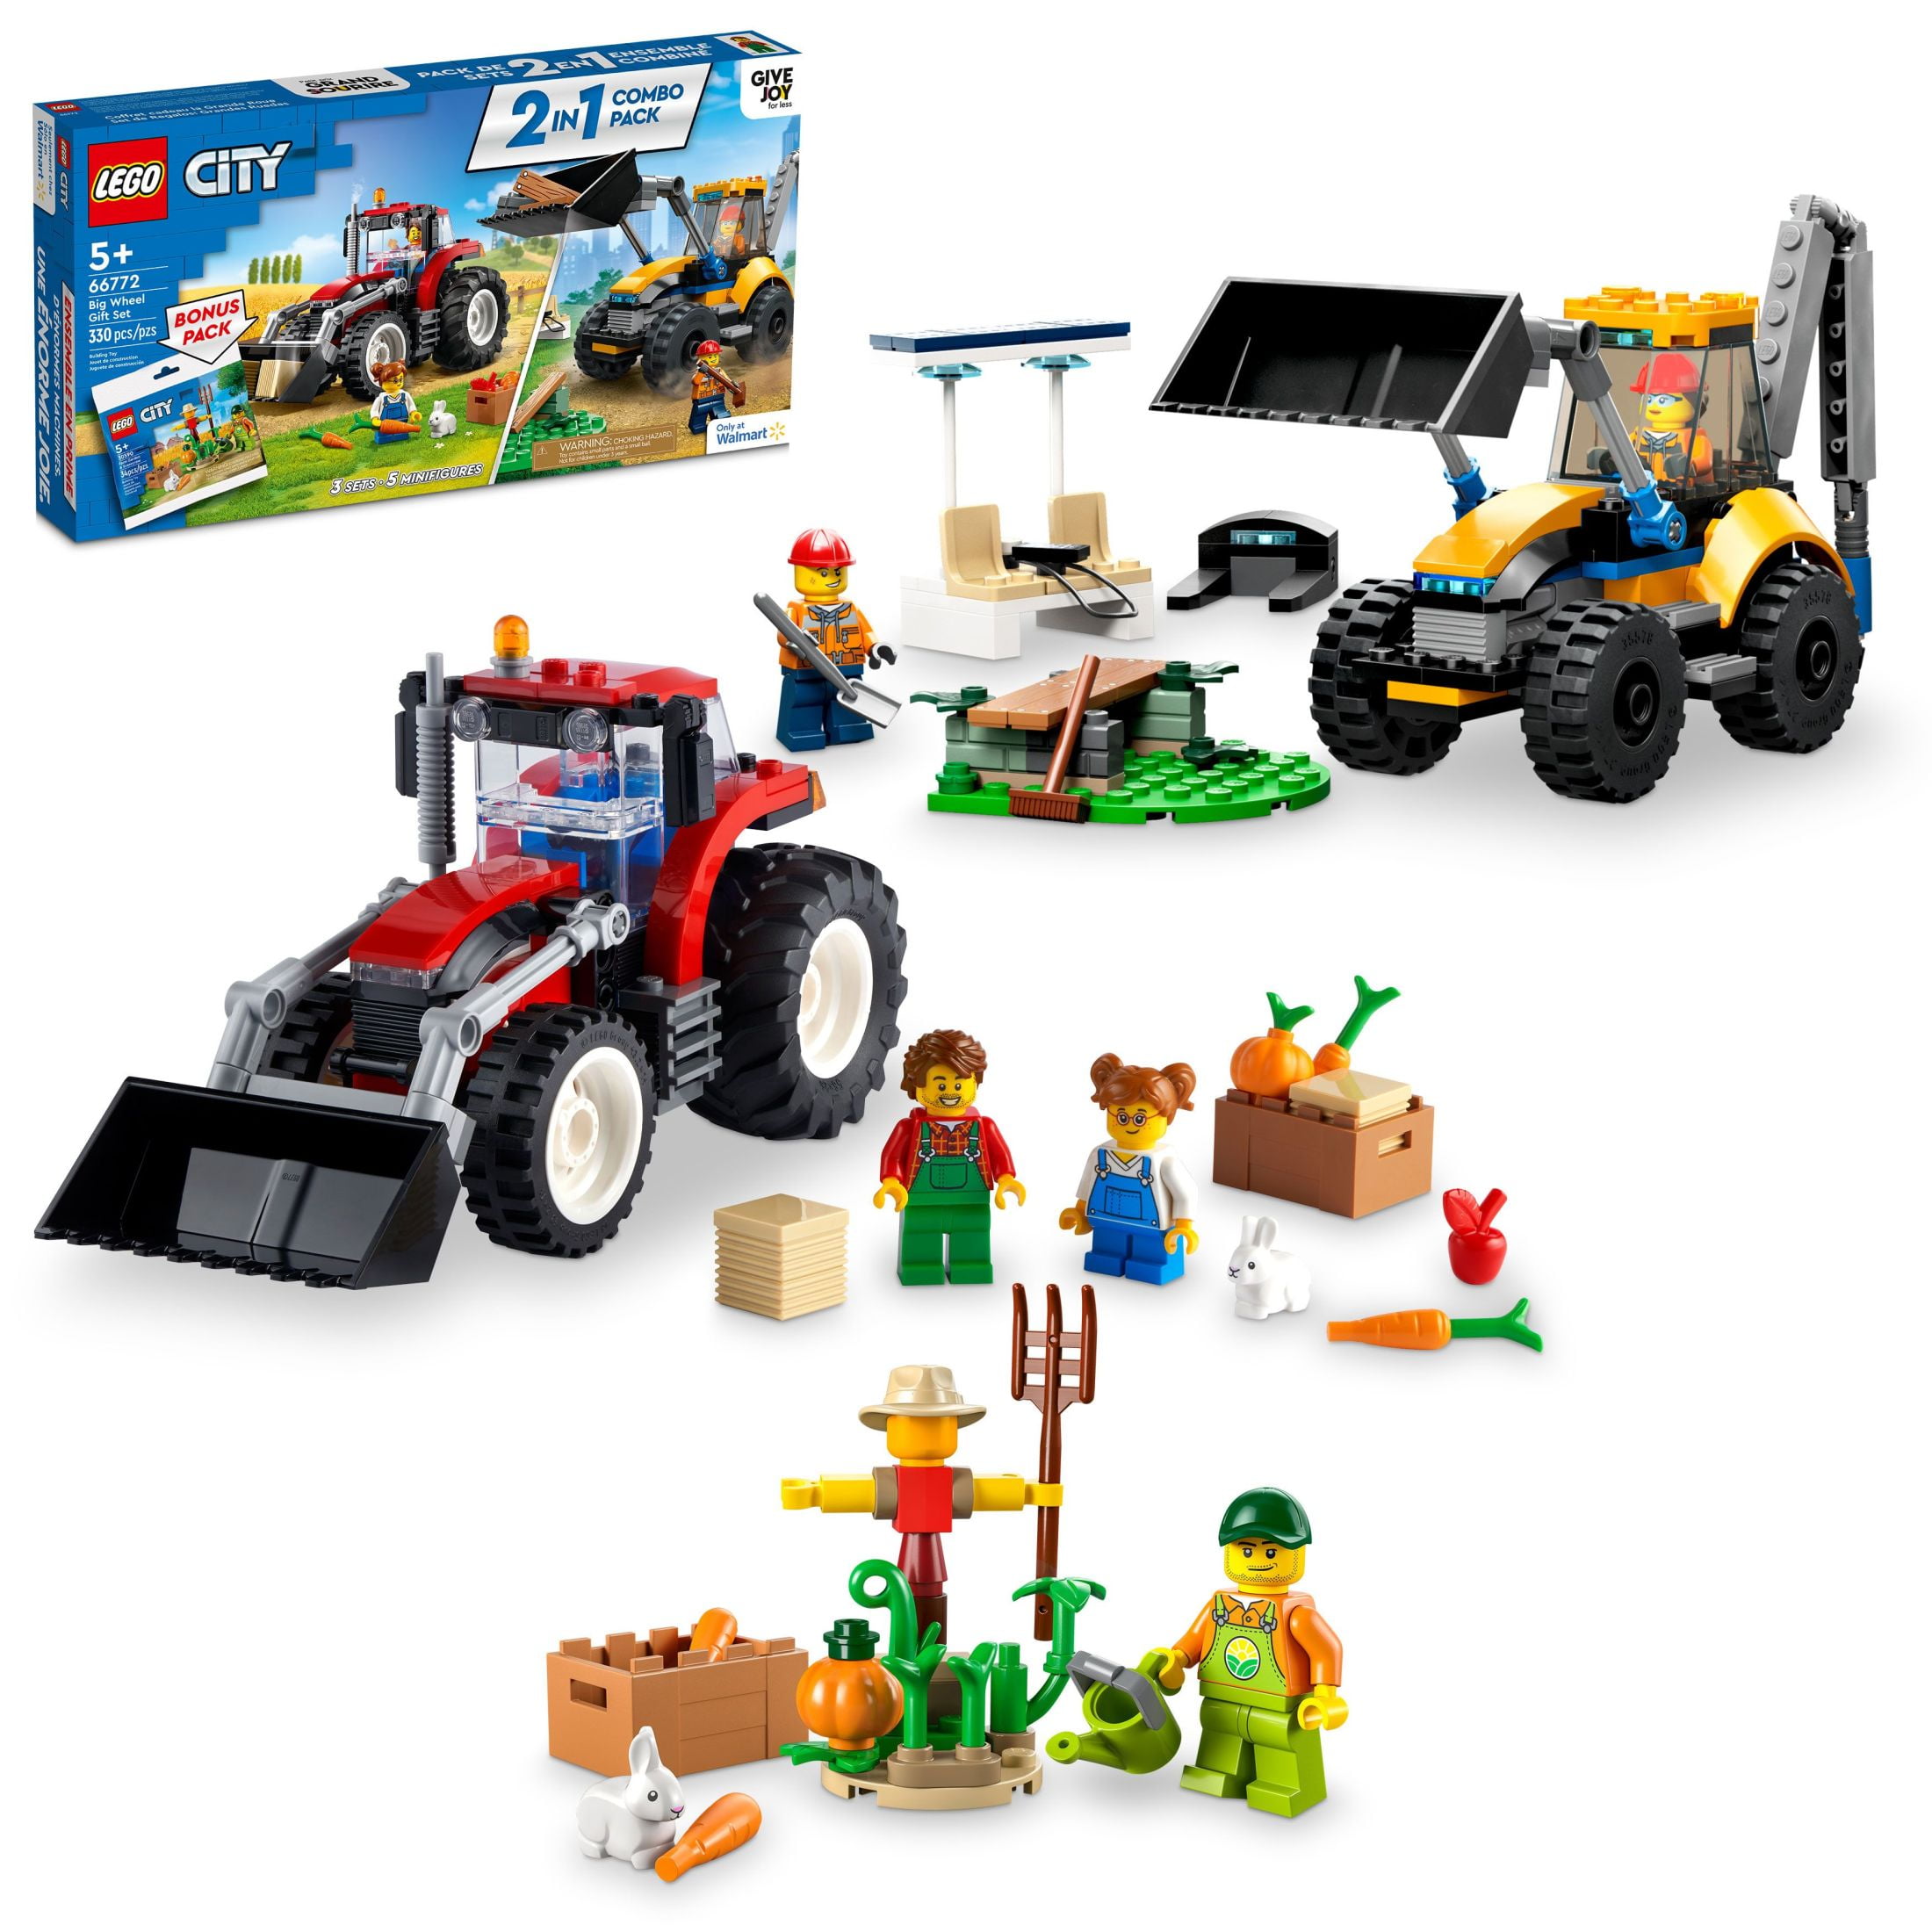 LEGO City Big Wheel Gift Set, 2in1 Tractor and Construction Digger Building  Toy Sets Plus Farm Garden & Scarecrow Bonus Pack, Great Gift for Boys and